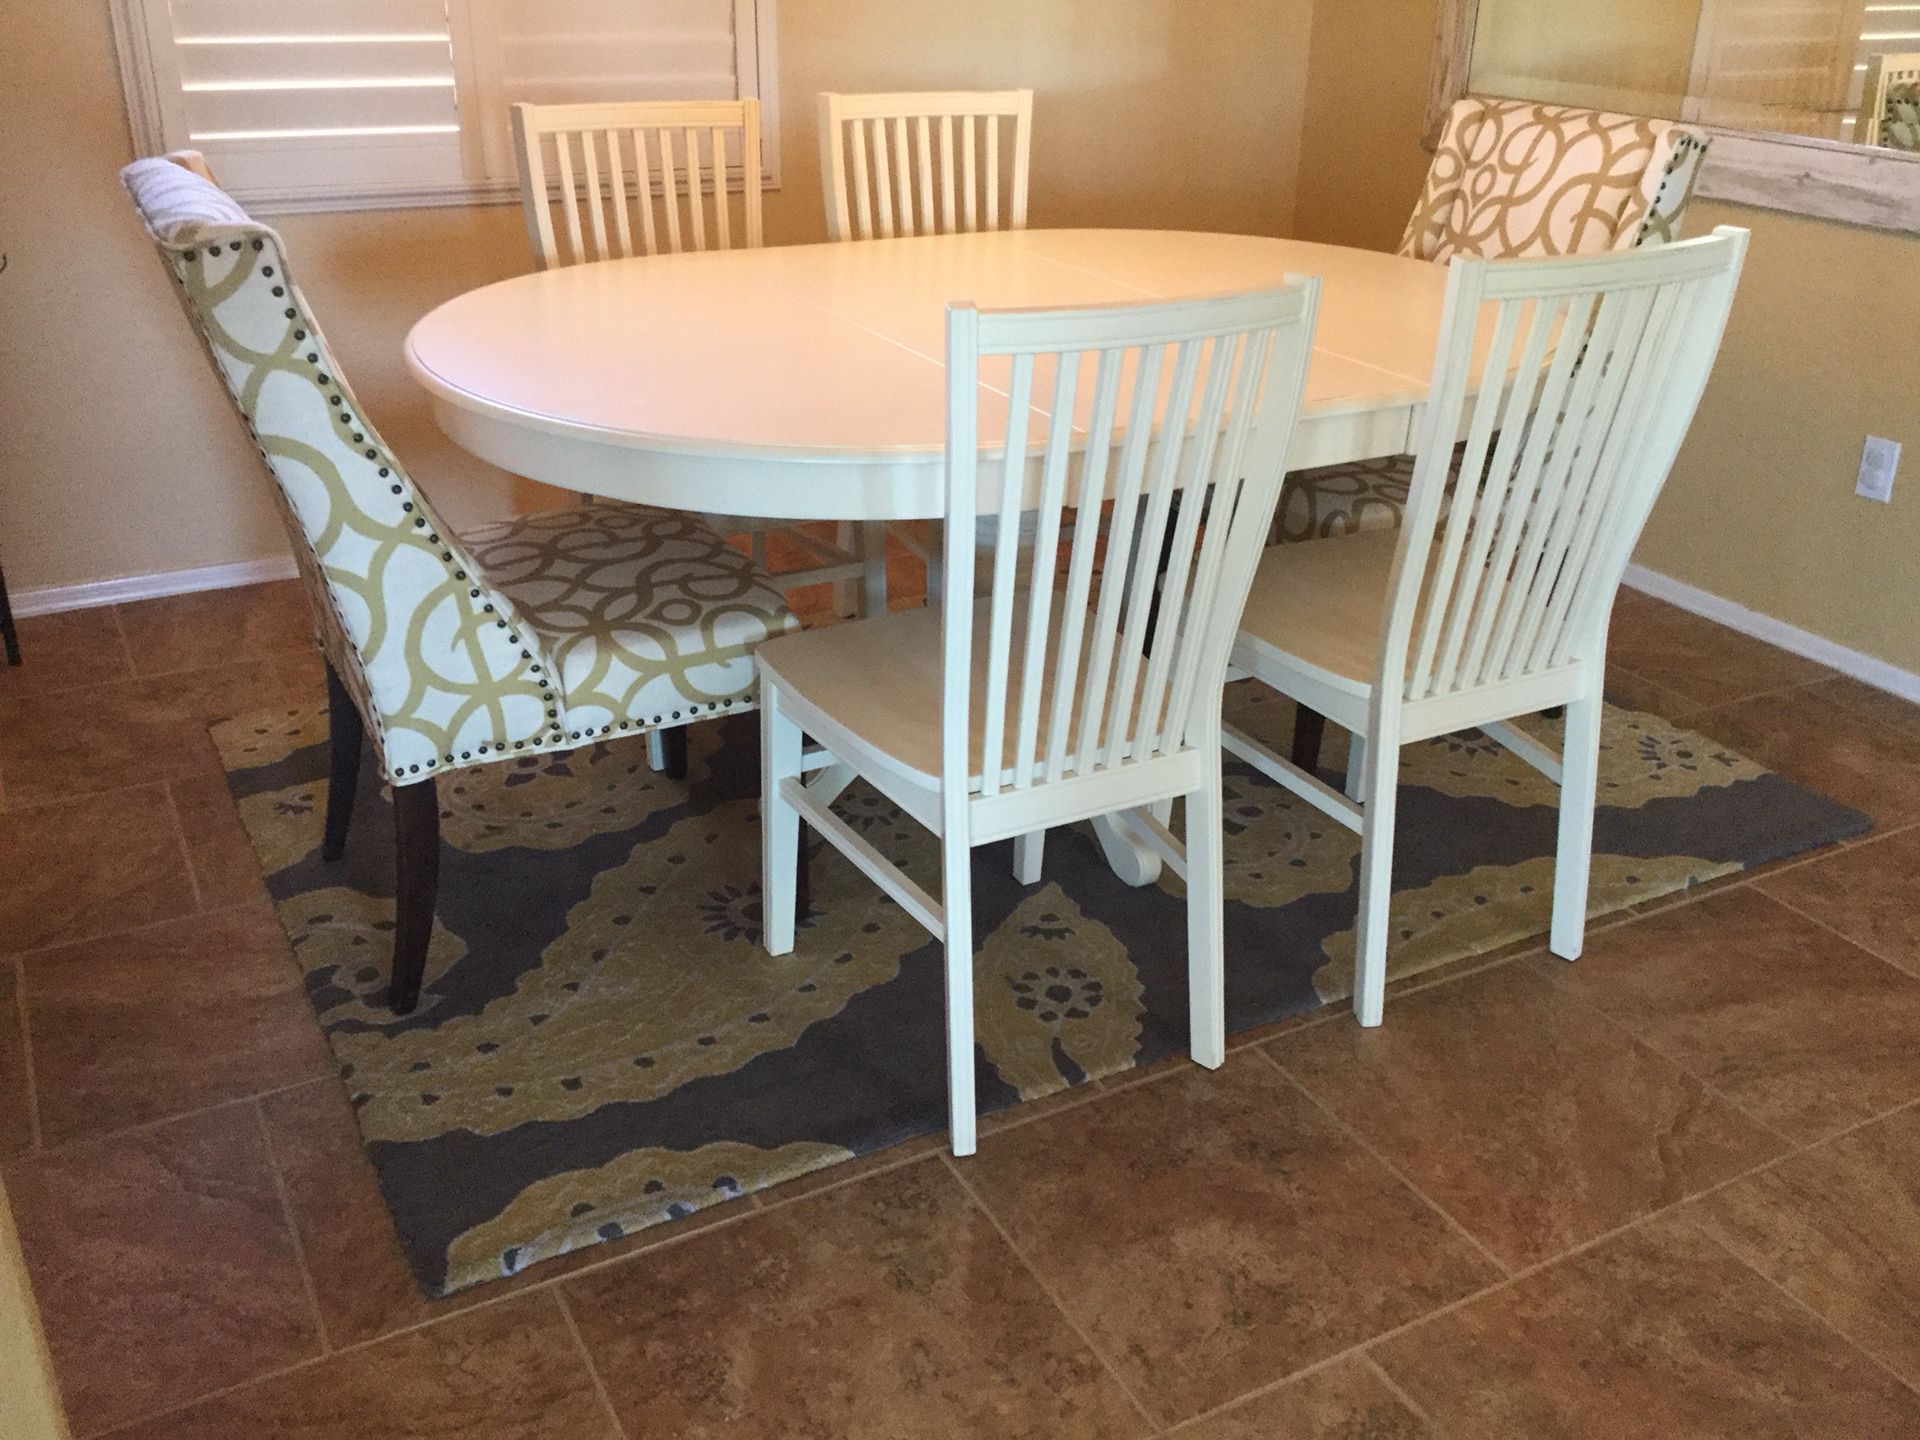 Pier 1 Imports Ronan Collection, Pier 1 Imports Dining Table And Chairs